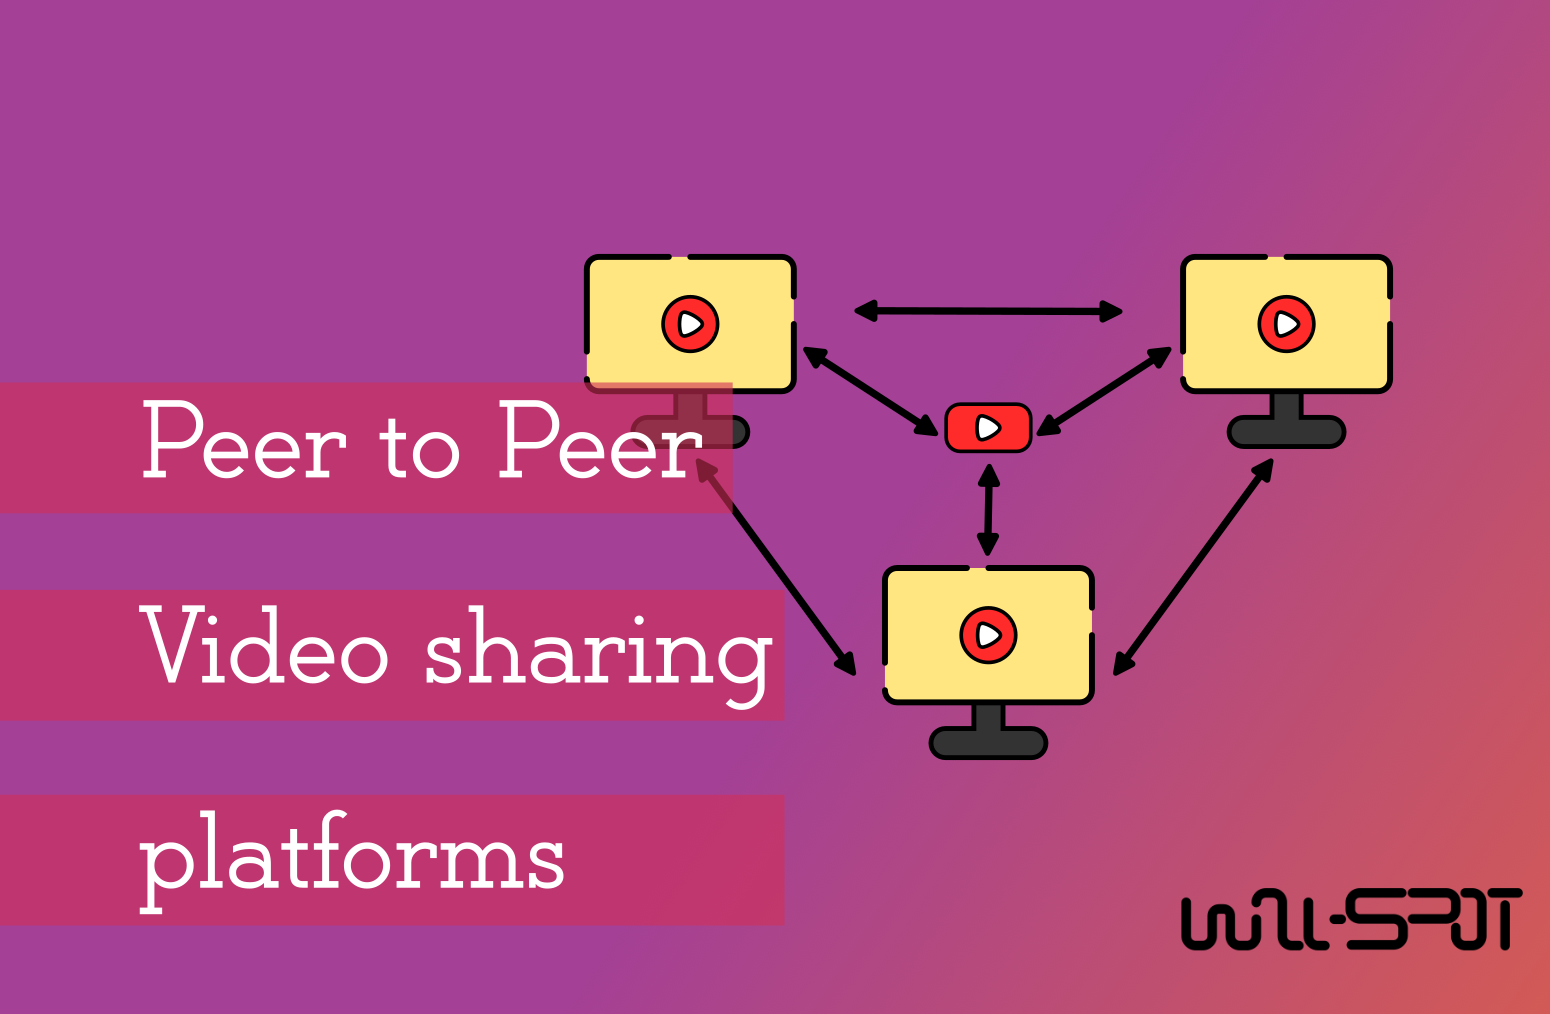 Alternative To YouTube And Peer To Peer Video Sharing Platforms - wall-spot